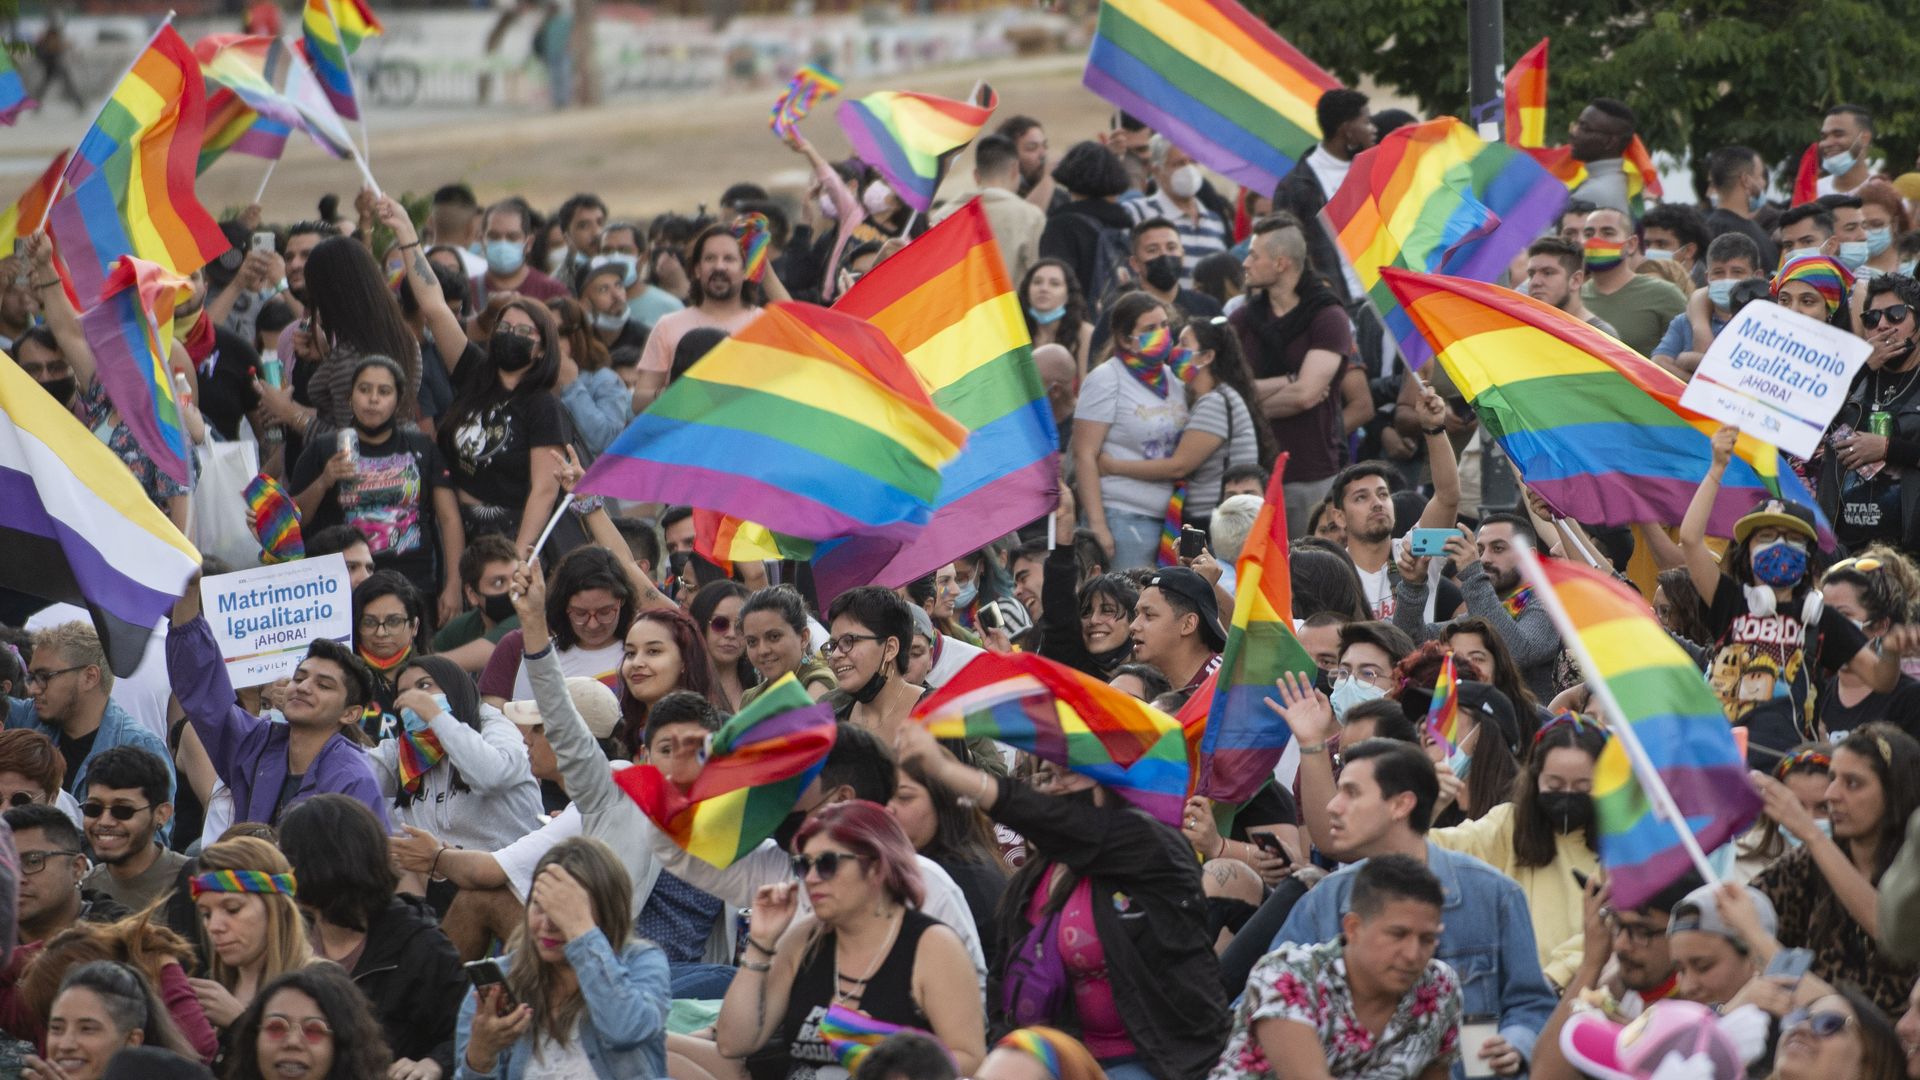  People celebrate waving rainbow flags during a rally after the bill for same-sex marriage was approved by the Chilean senate on December 7